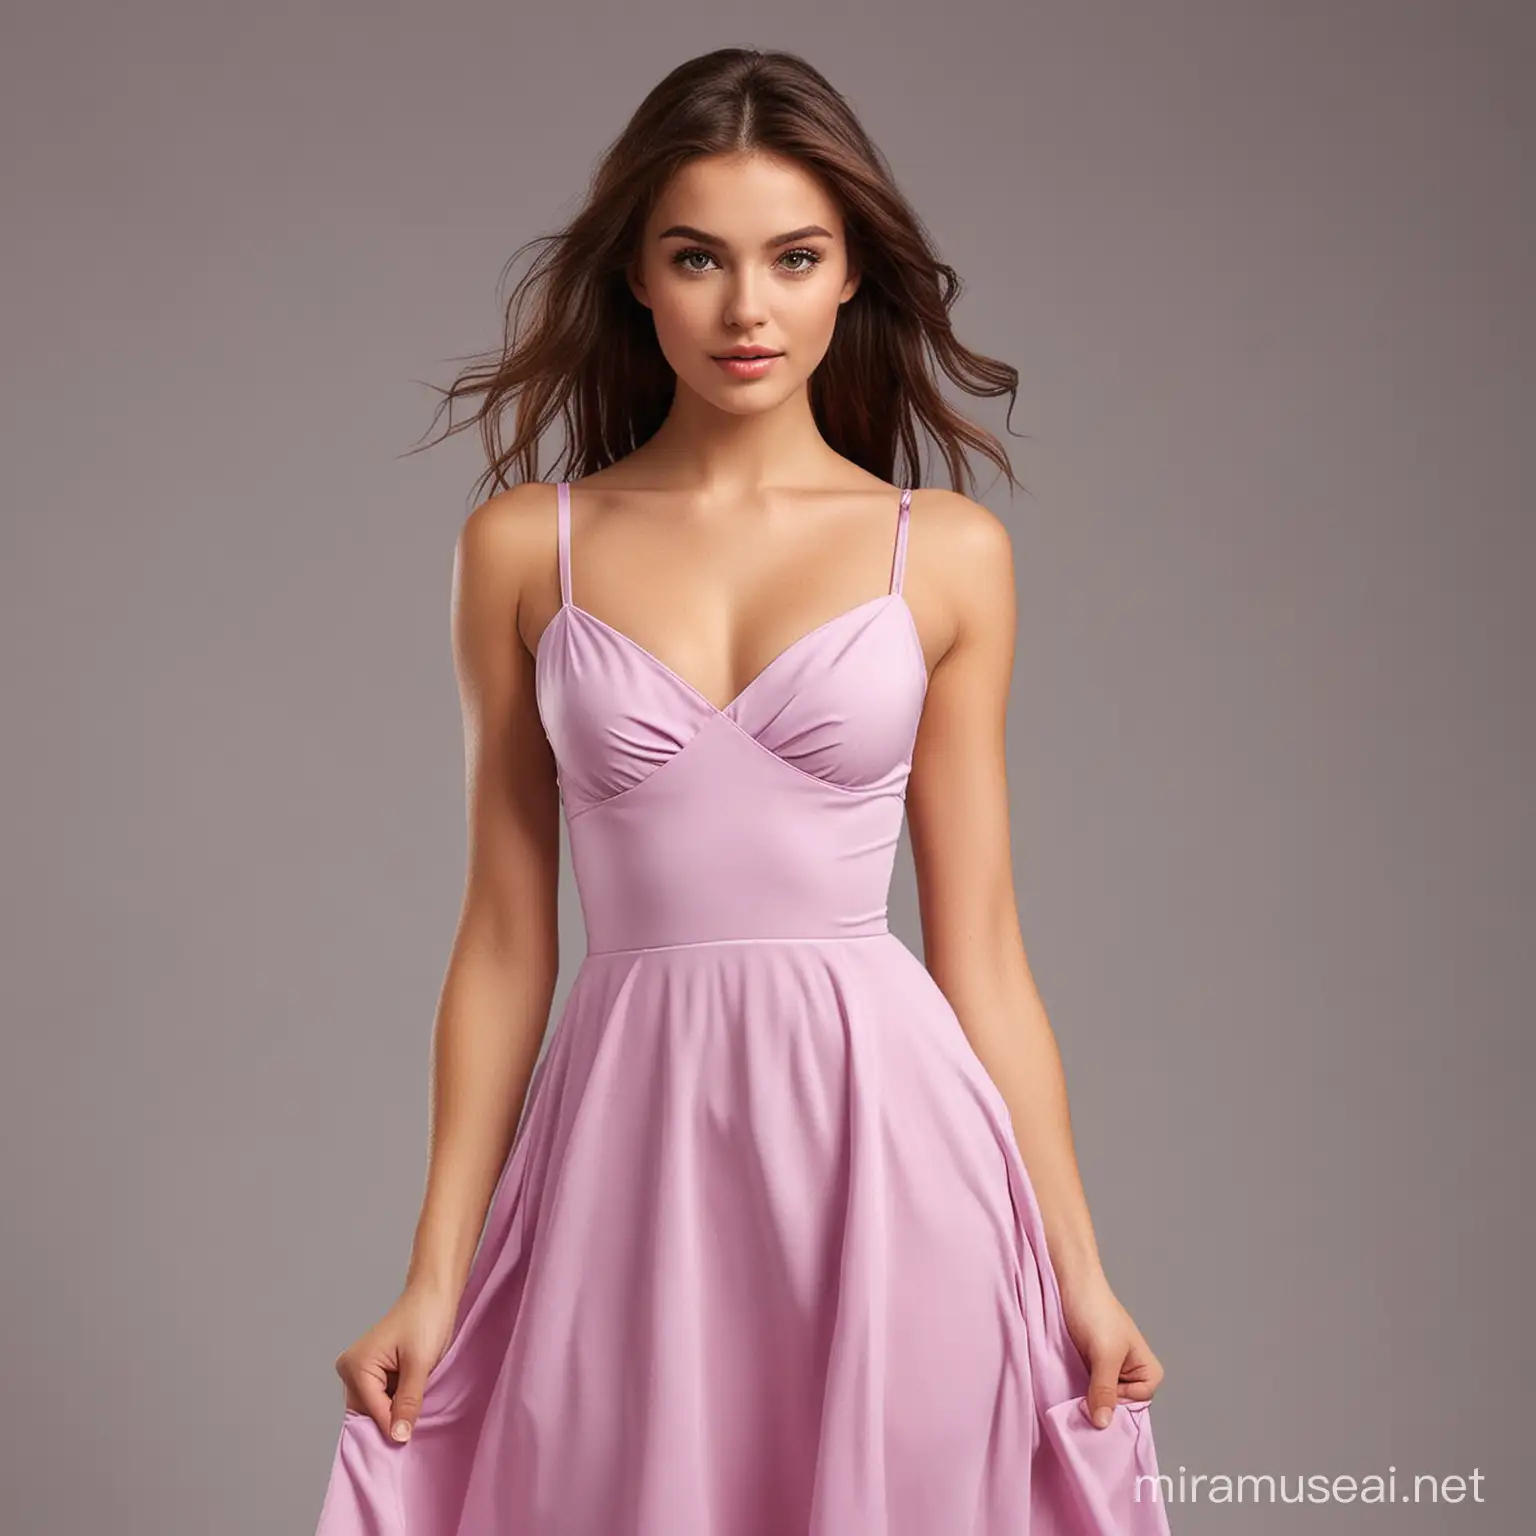 Confident Woman in Pink and Purple LowCut Dress